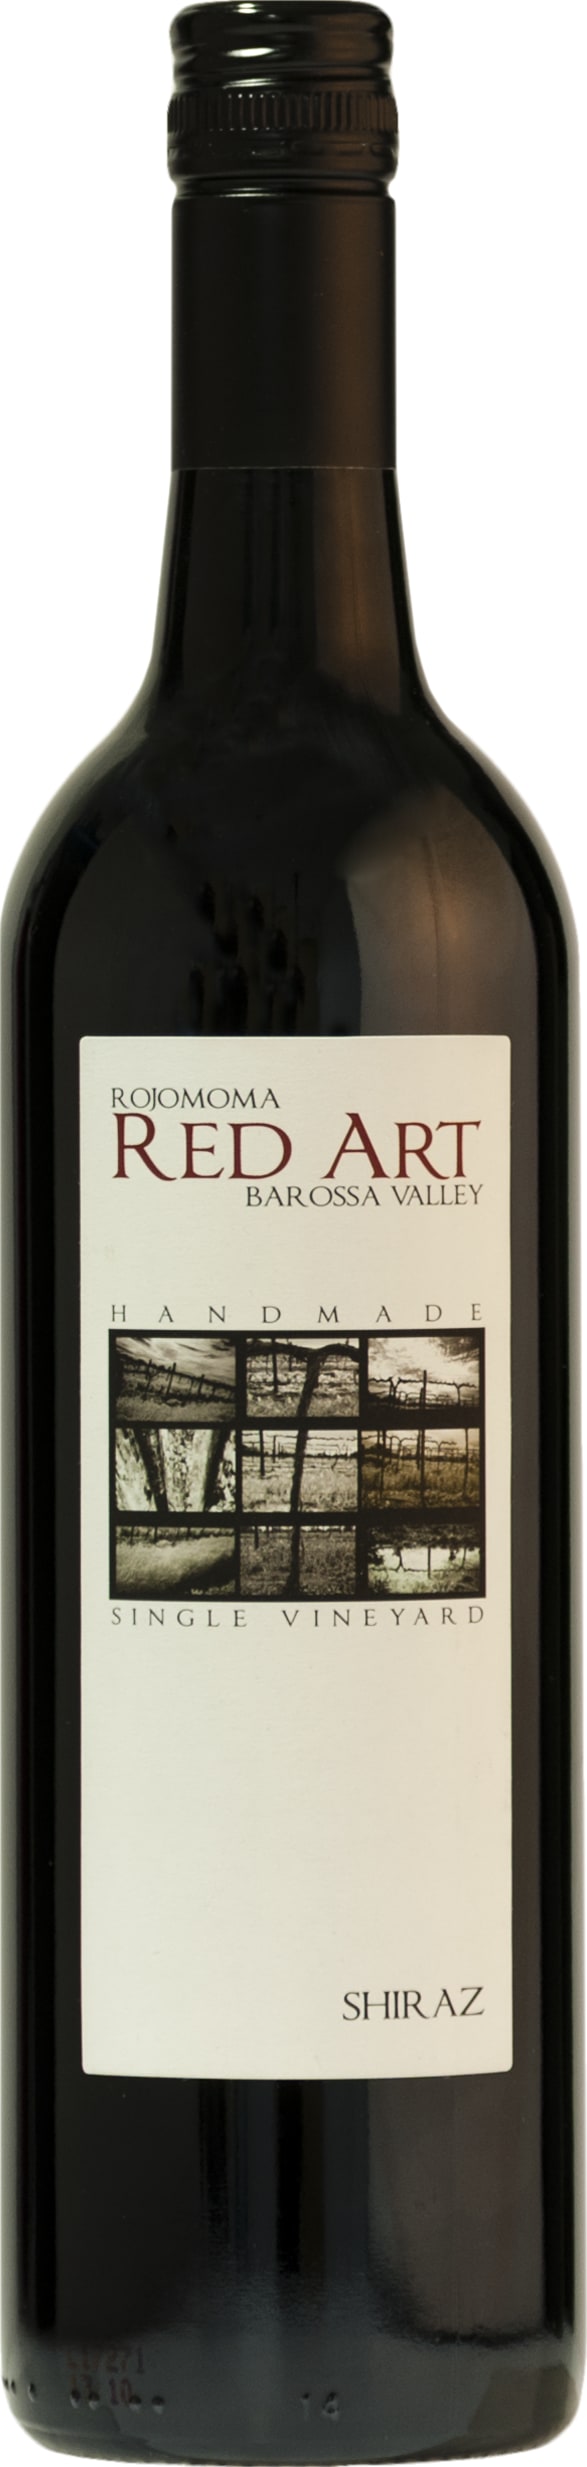 Rojomoma Red Art Shiraz (Cellar Release) 2012 75cl - Buy Rojomoma Wines from GREAT WINES DIRECT wine shop